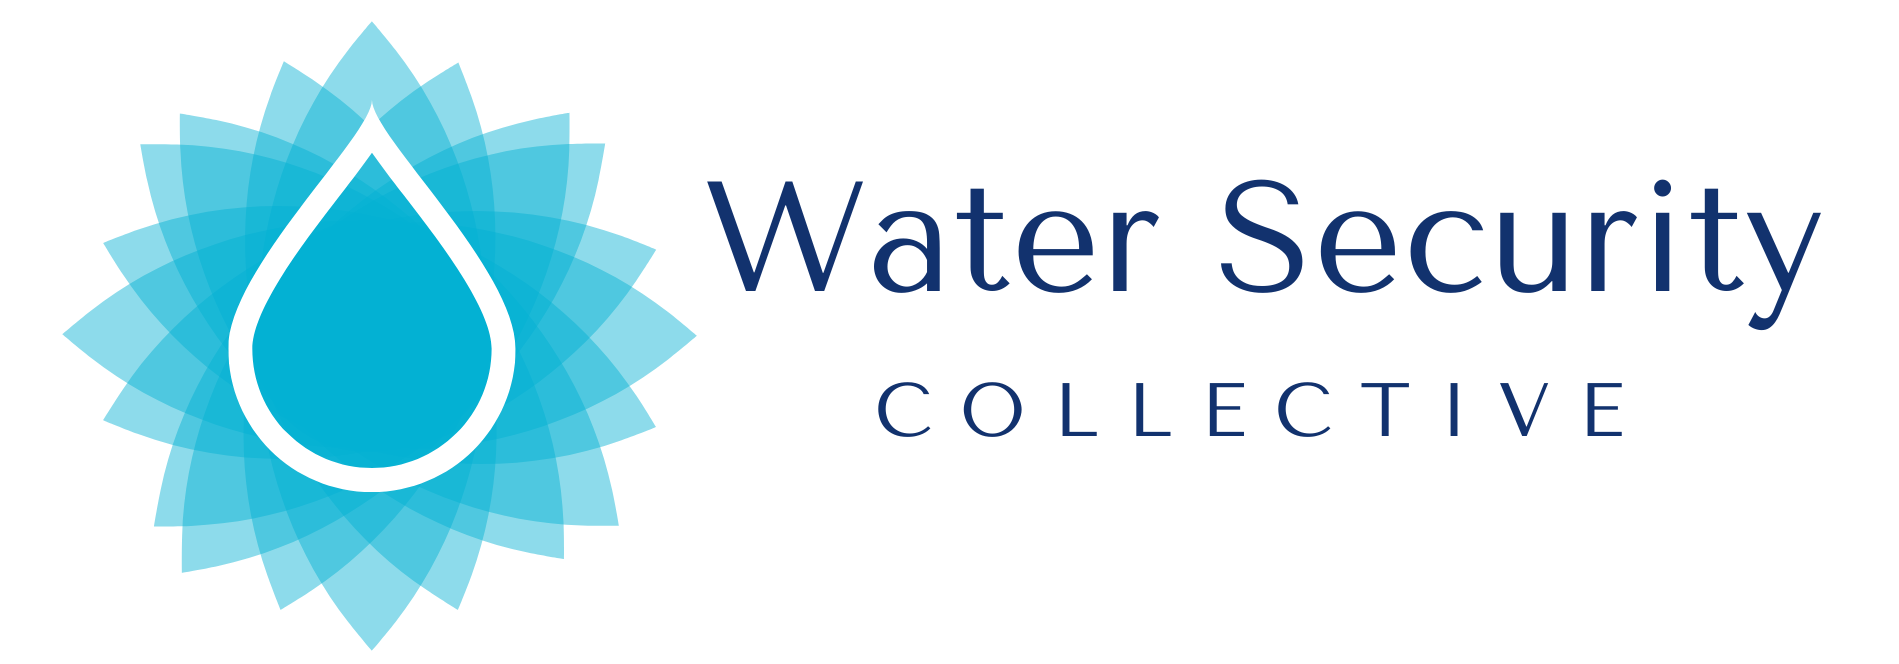 Water Security Collective